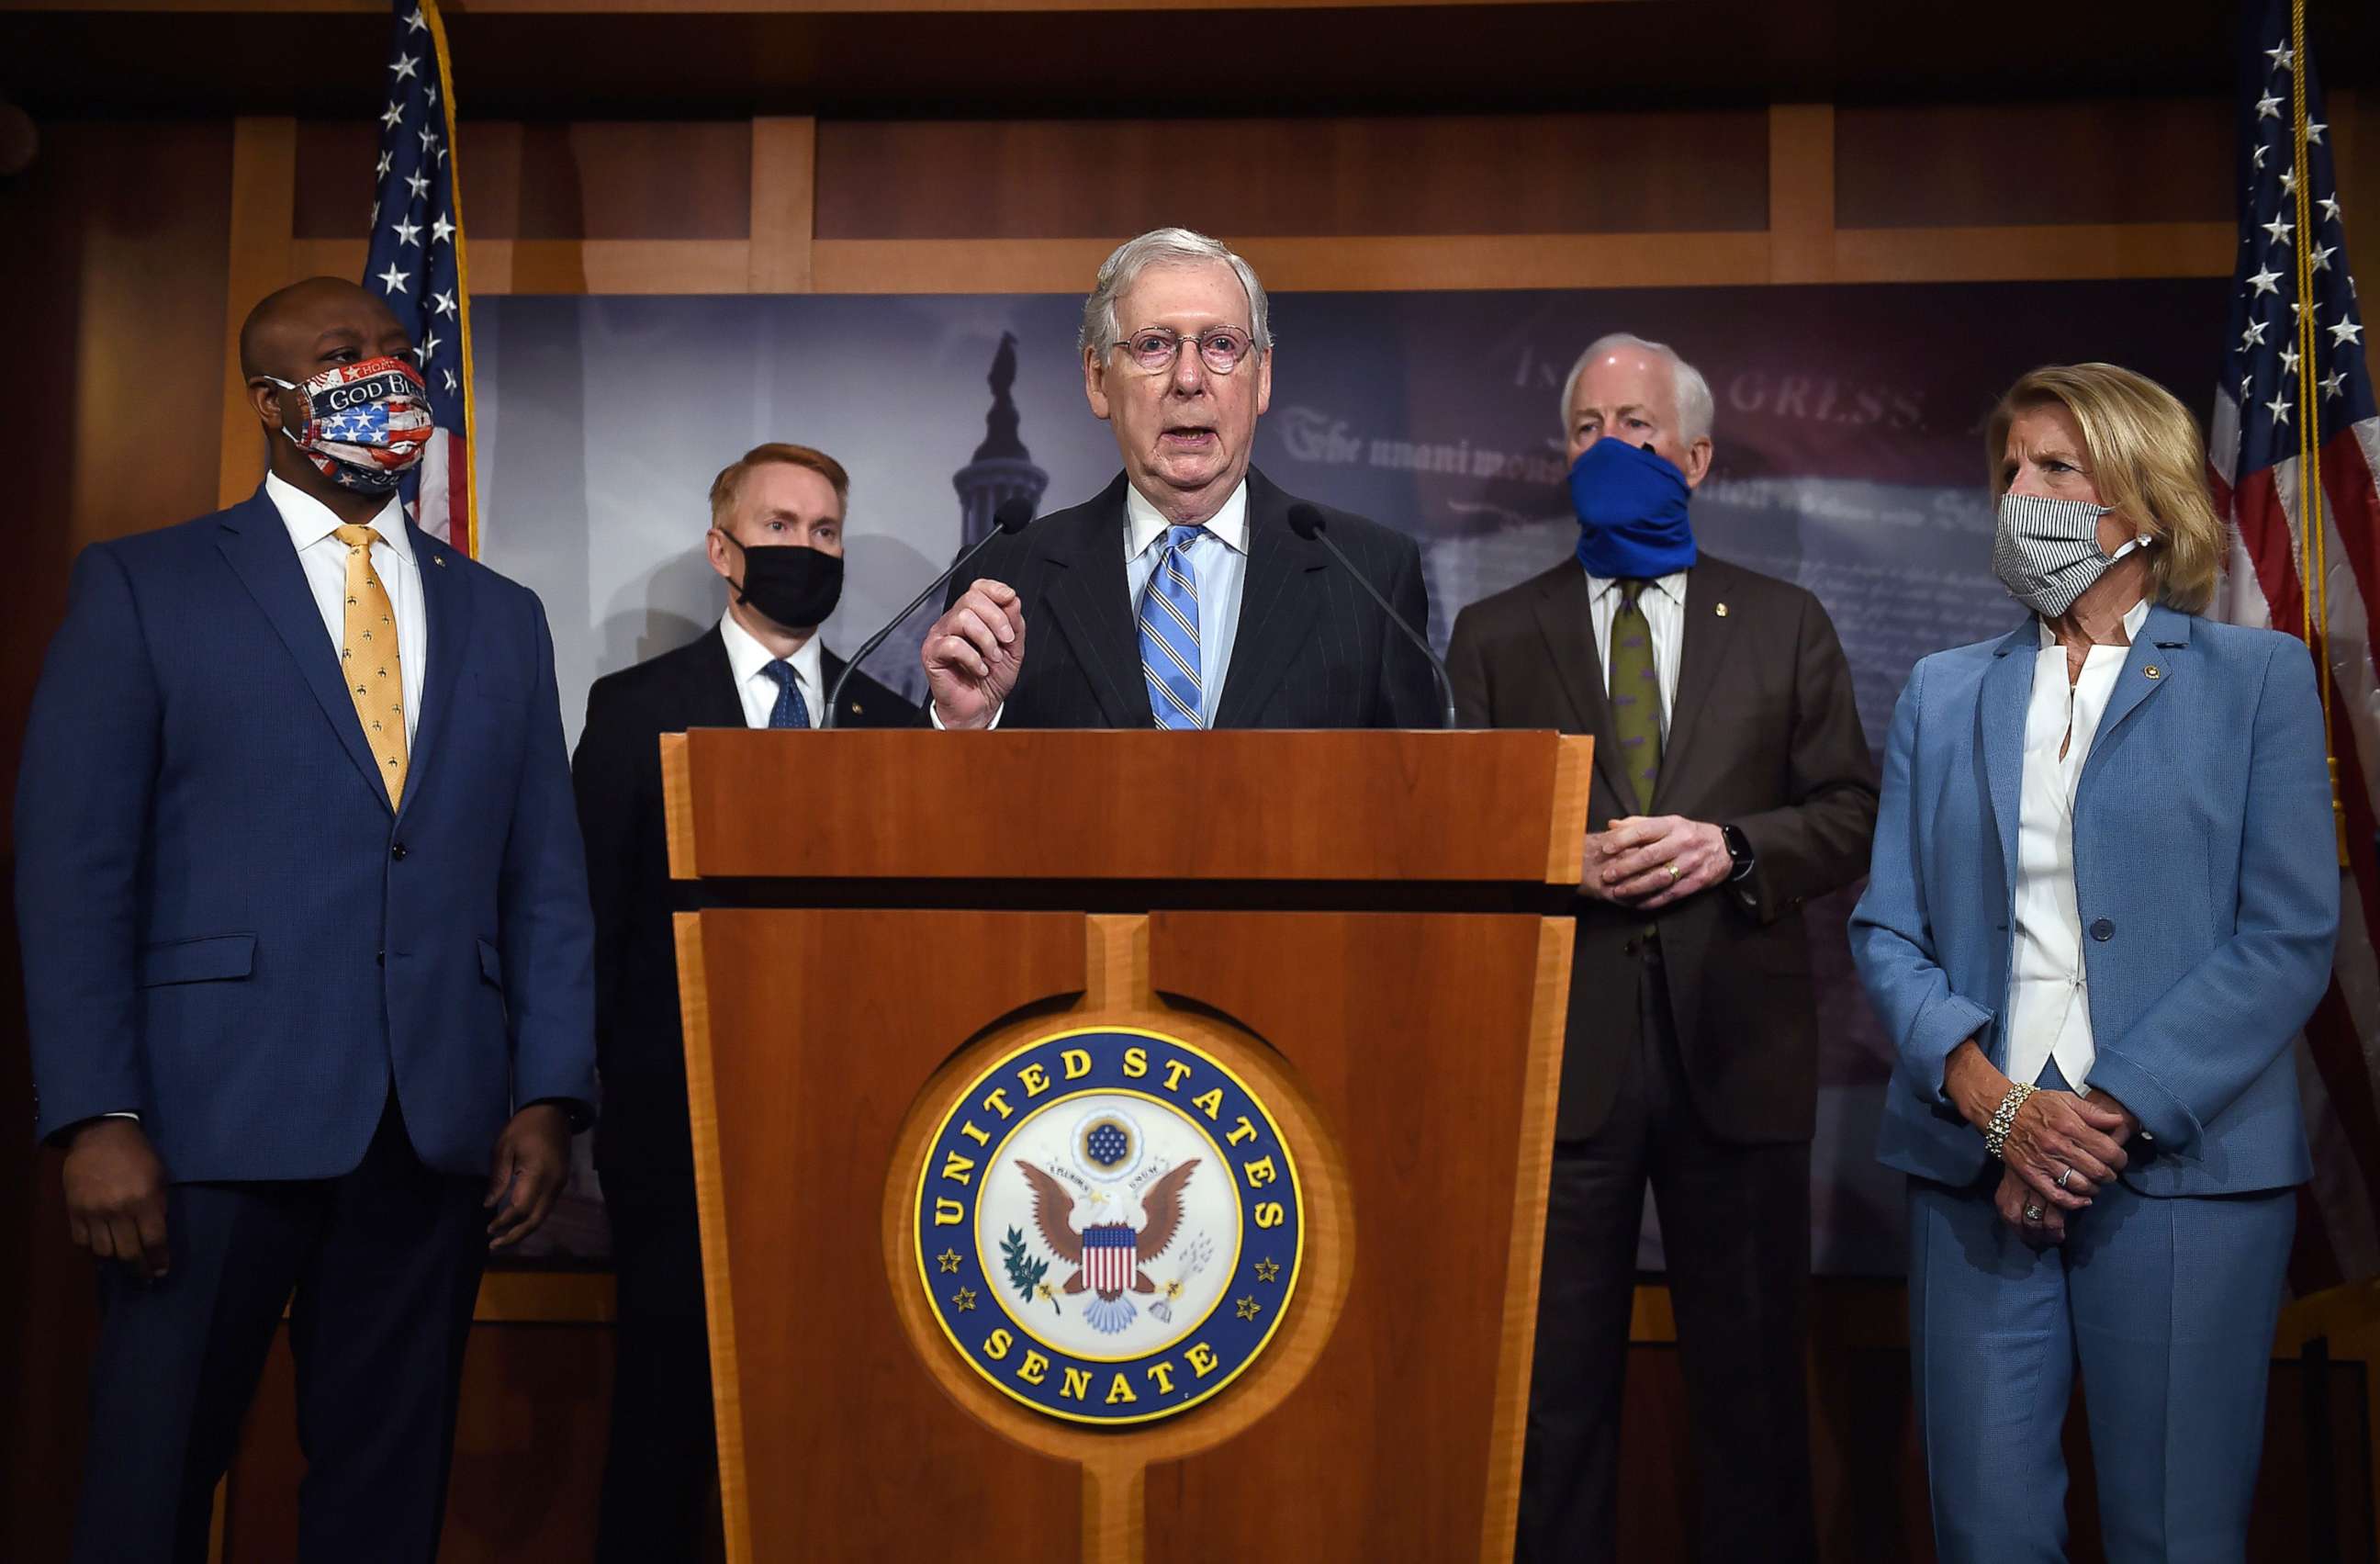 PHOTO: Republican Senate Majority Leader Mitch McConnell speaks during a news conference to announce that the Senate is considering police reform legislation, at the U.S. Capitol, June 17, 2020 in Washington, D.C.